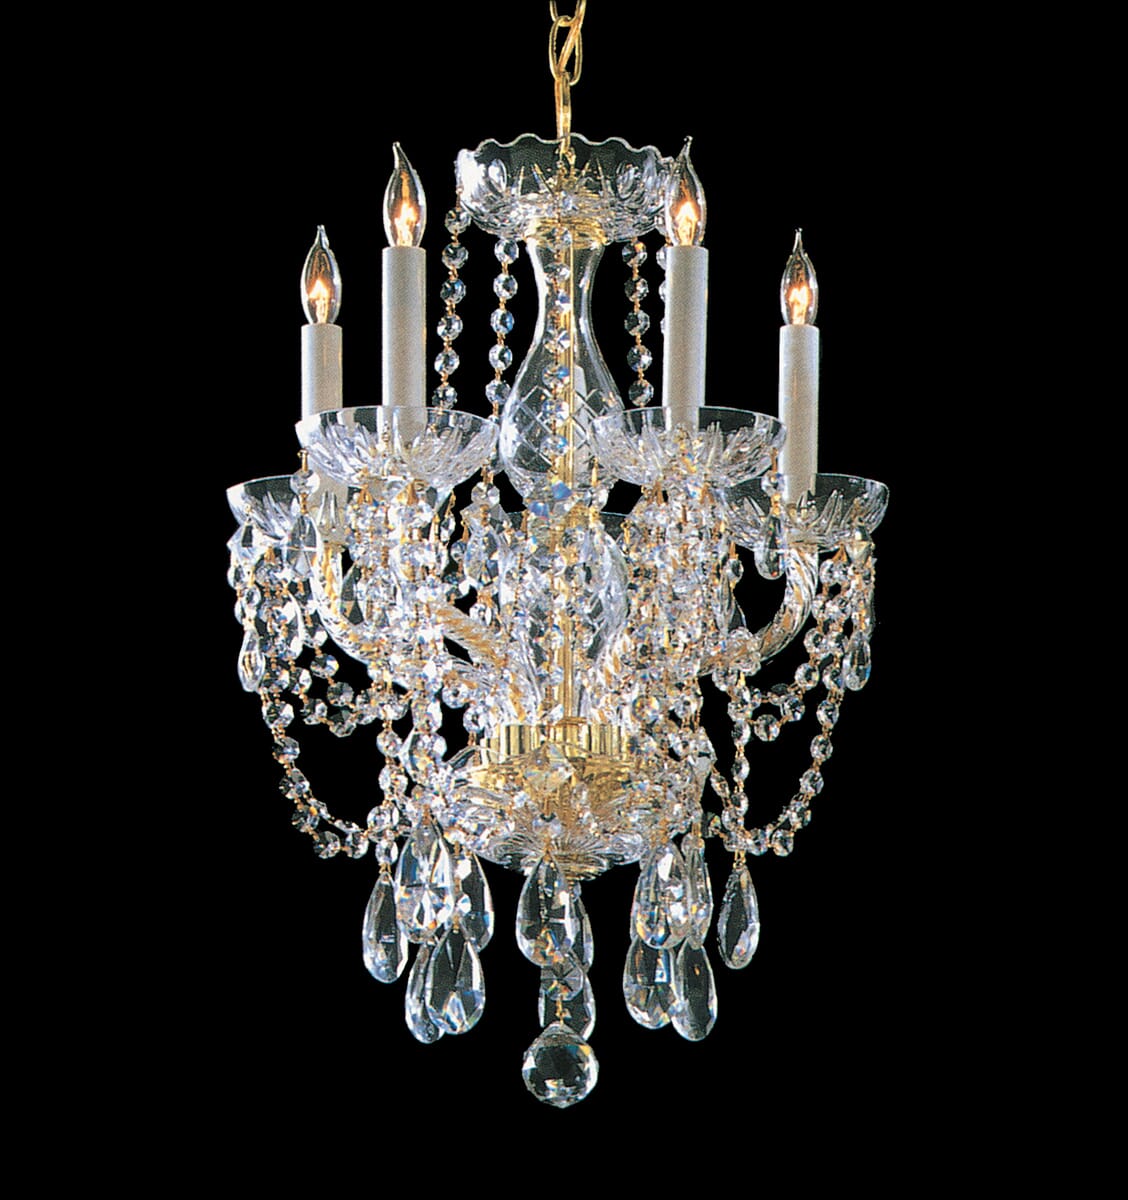 Traditional Crystal 5-Light 20"" Mini Chandelier in Polished Brass with Clear Hand Cut Crystals -  Crystorama, 1129-PB-CL-MWP